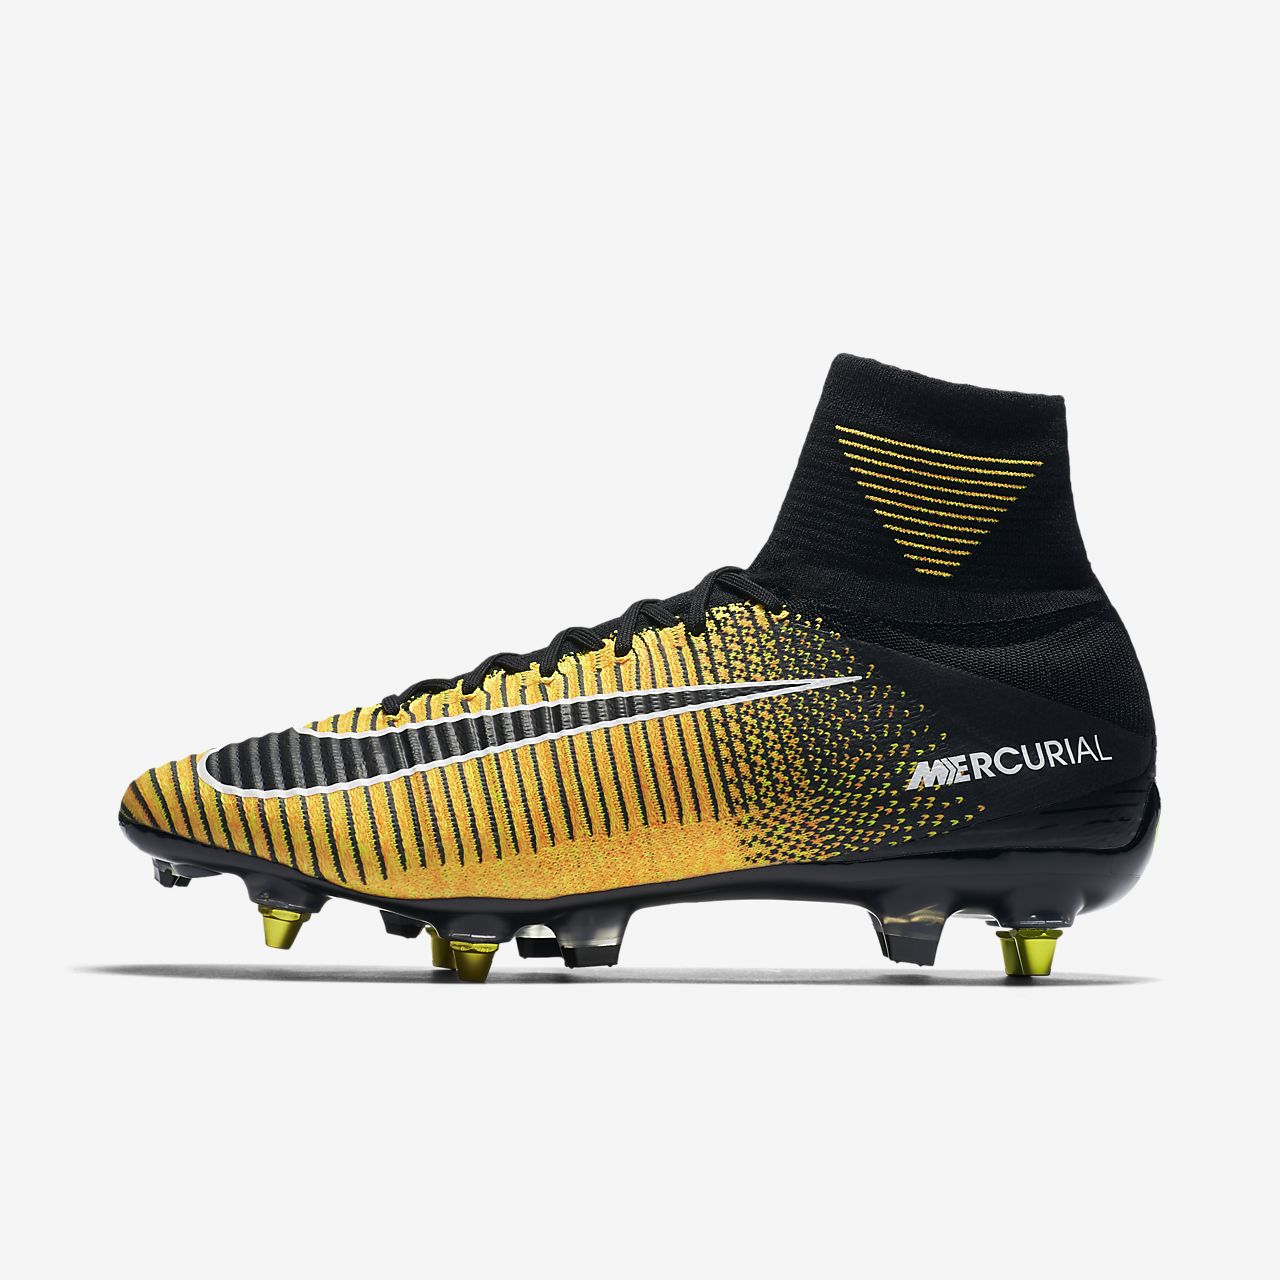 Unboxing Nike Mercurial Superfly 7 Elite SG PRO YouTube